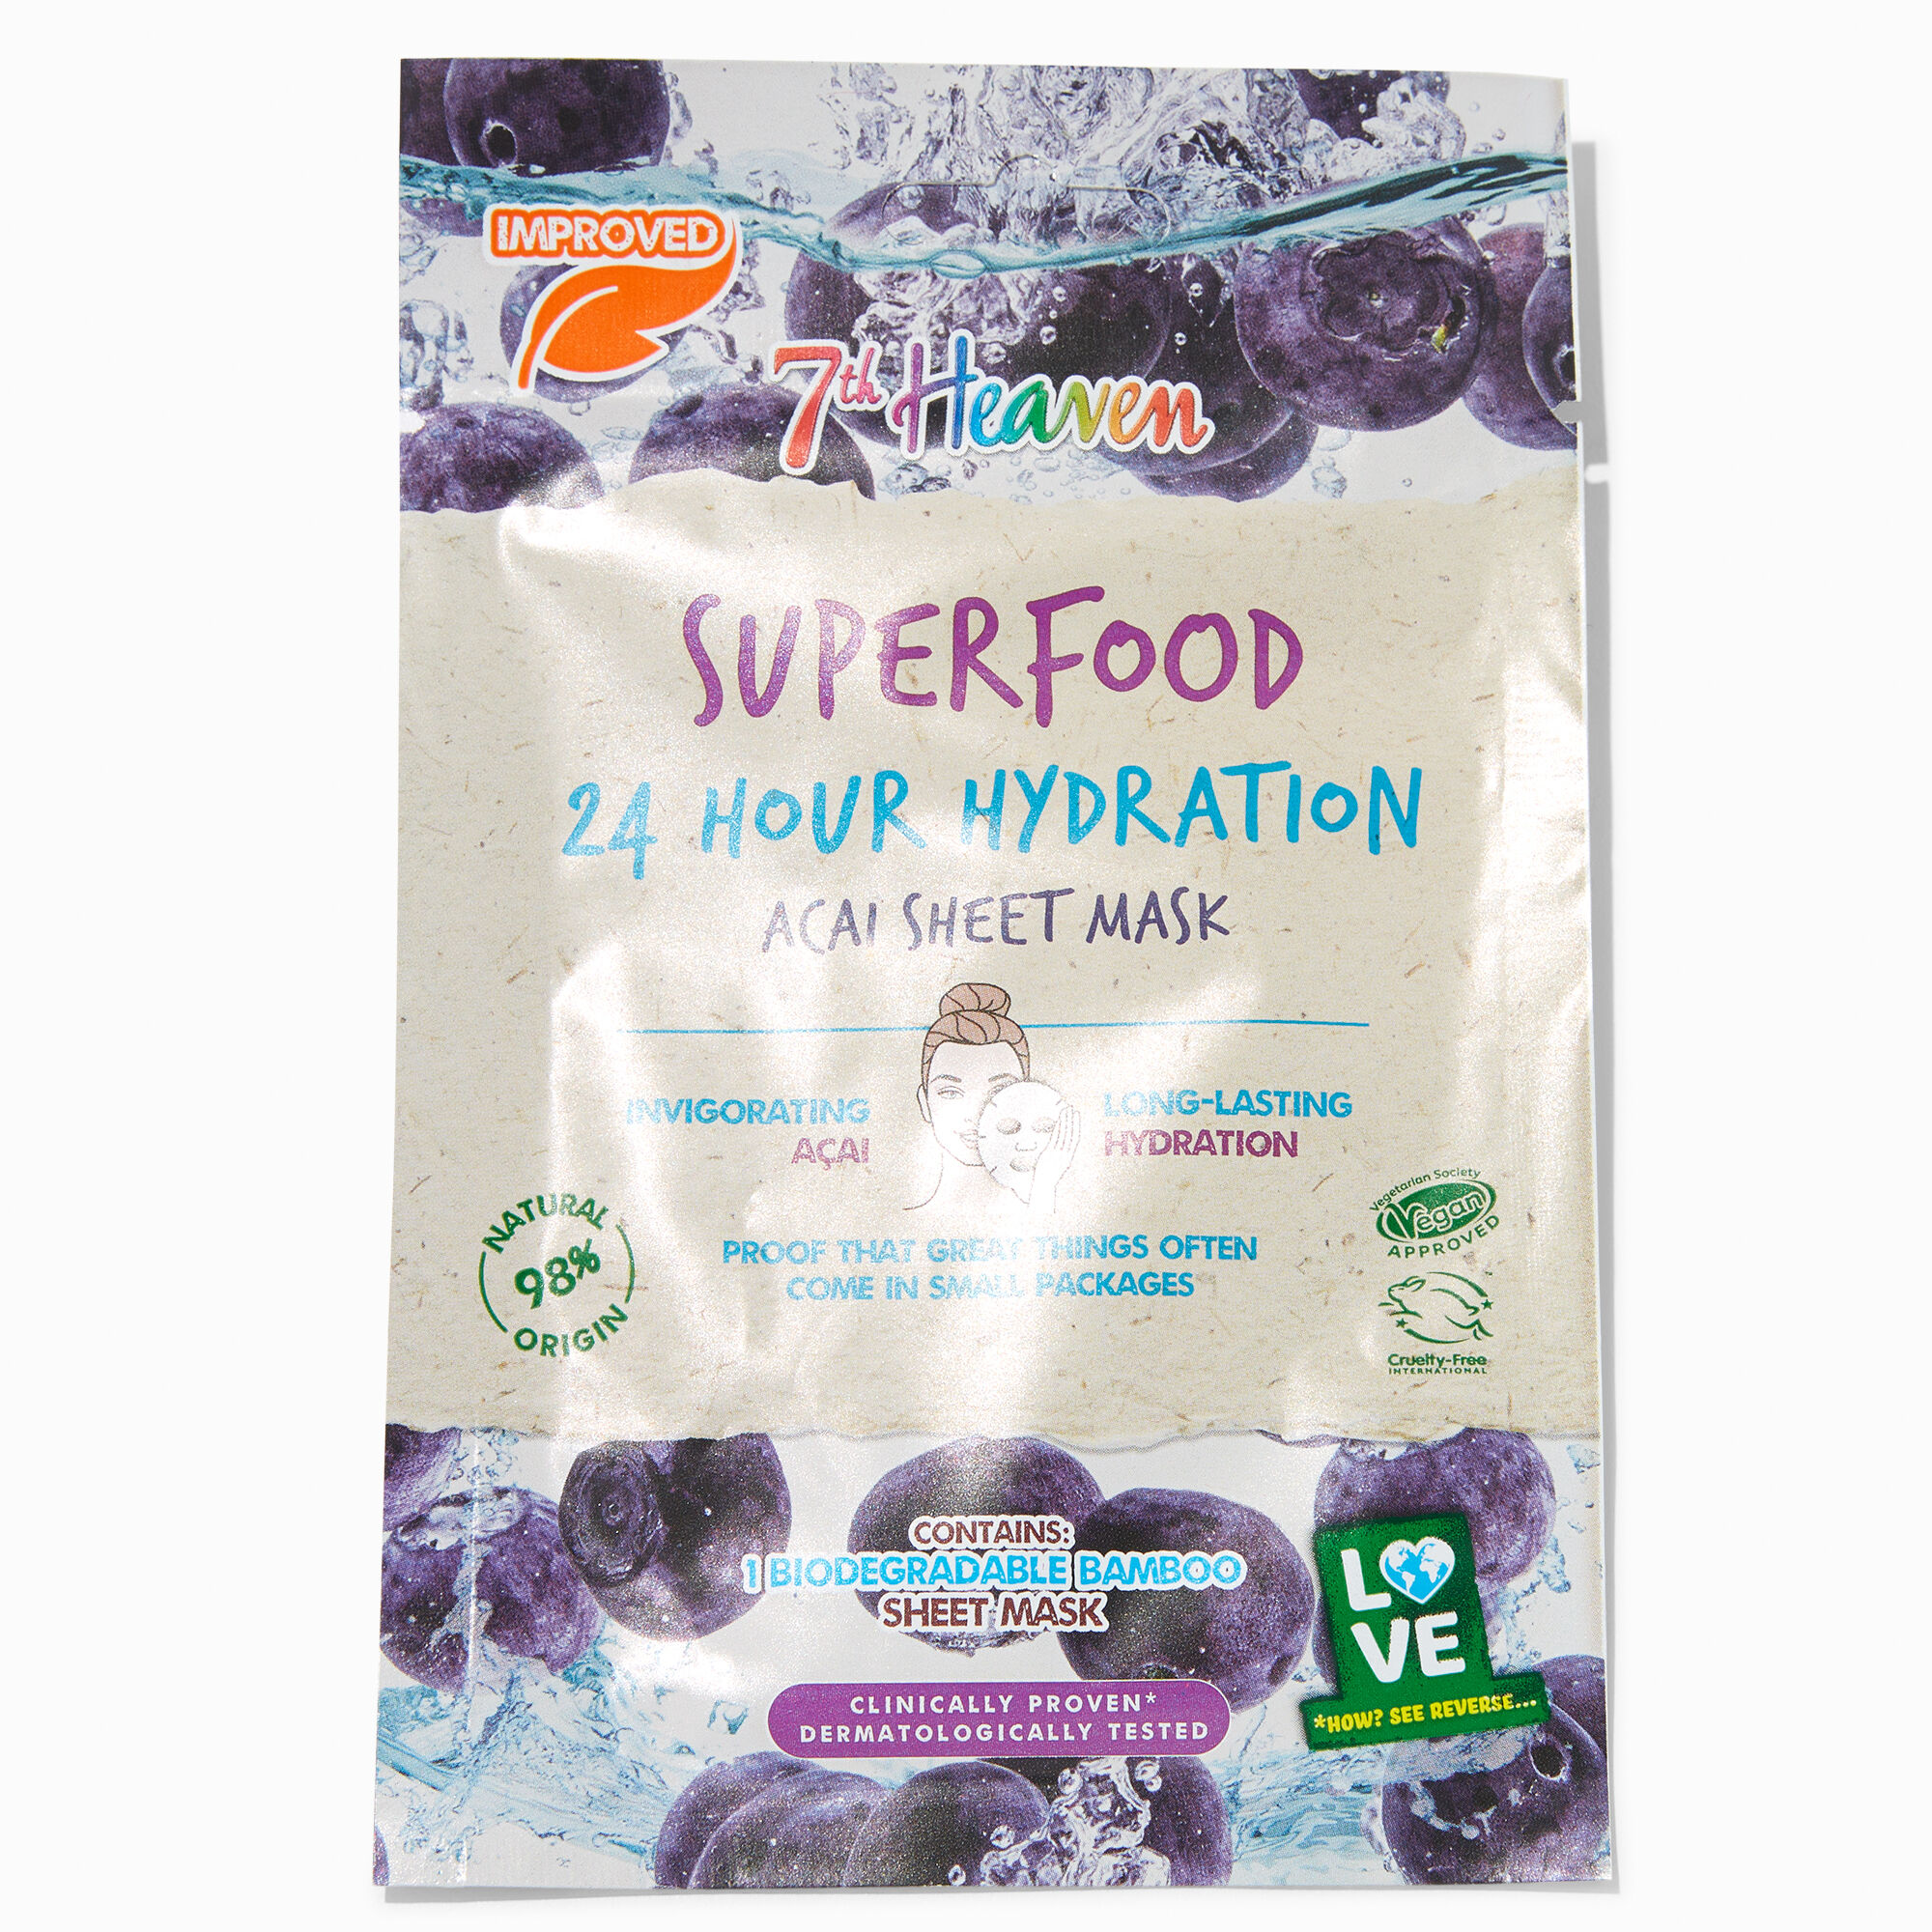 View Claires 7Th Heaven Superfood 24 Hour Hydration Acai Sheet Face Mask information